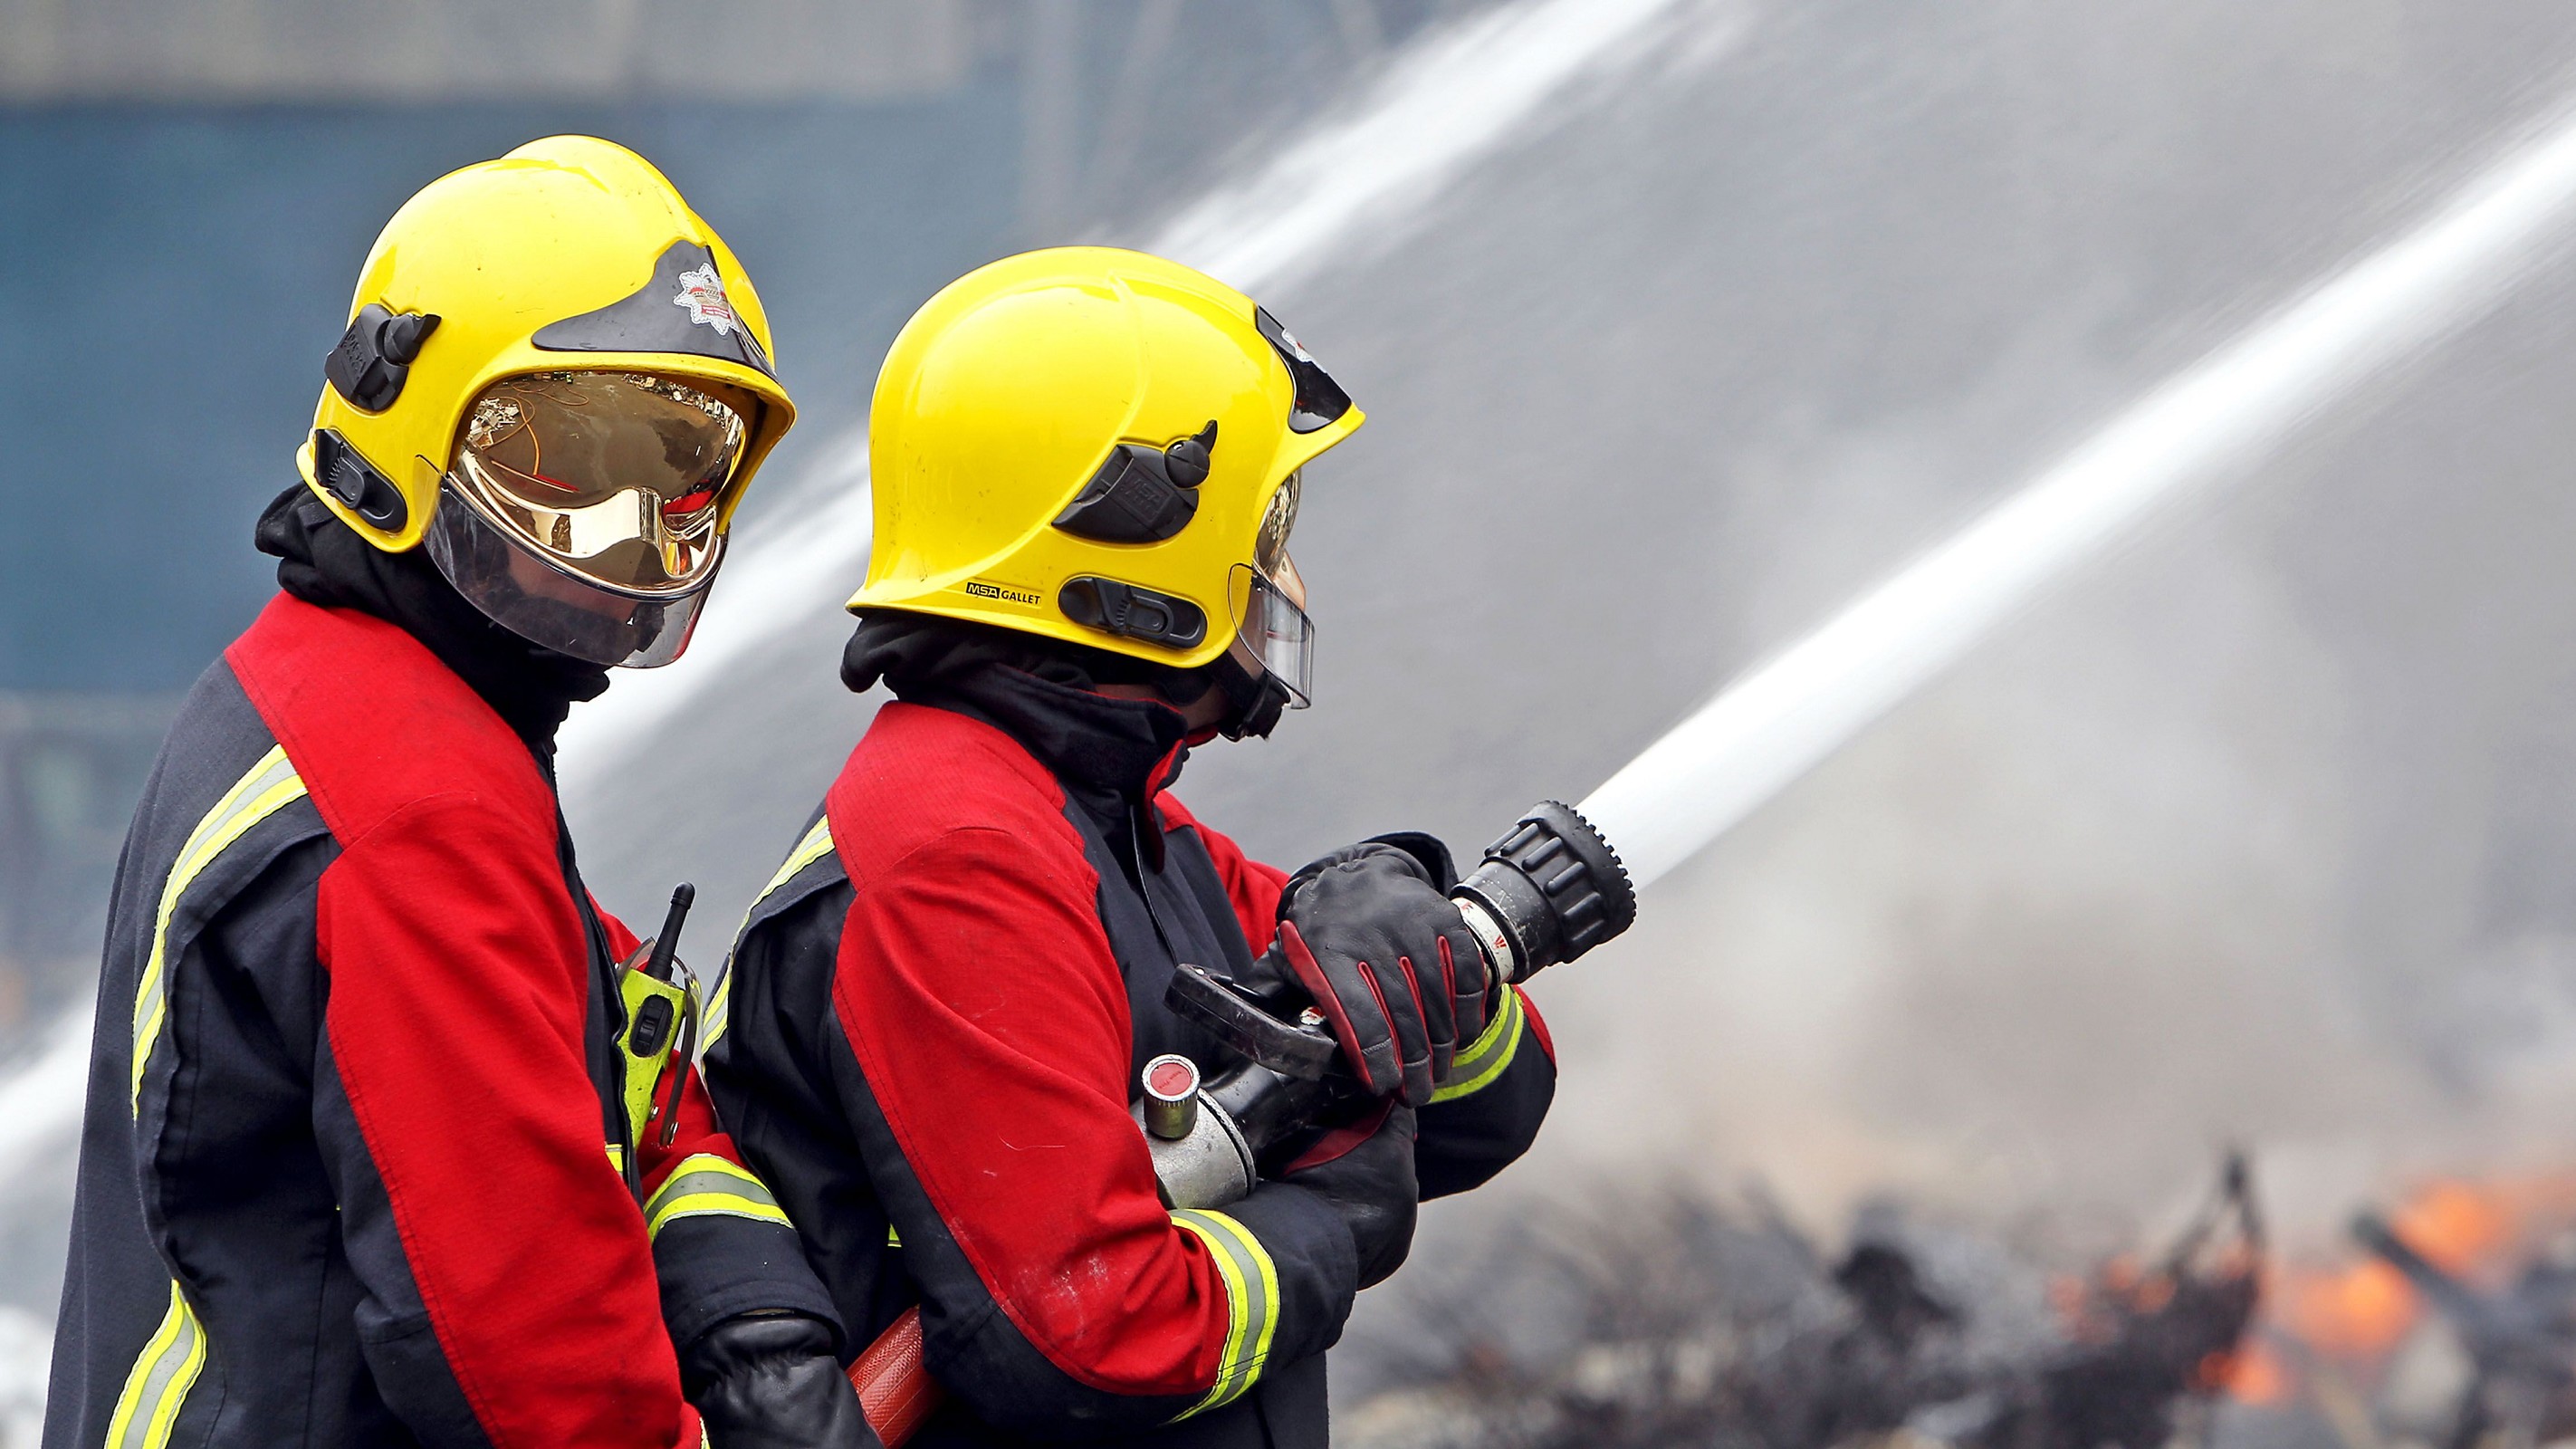 Firefighters have been tackling a blaze at a Birmingham boatyard